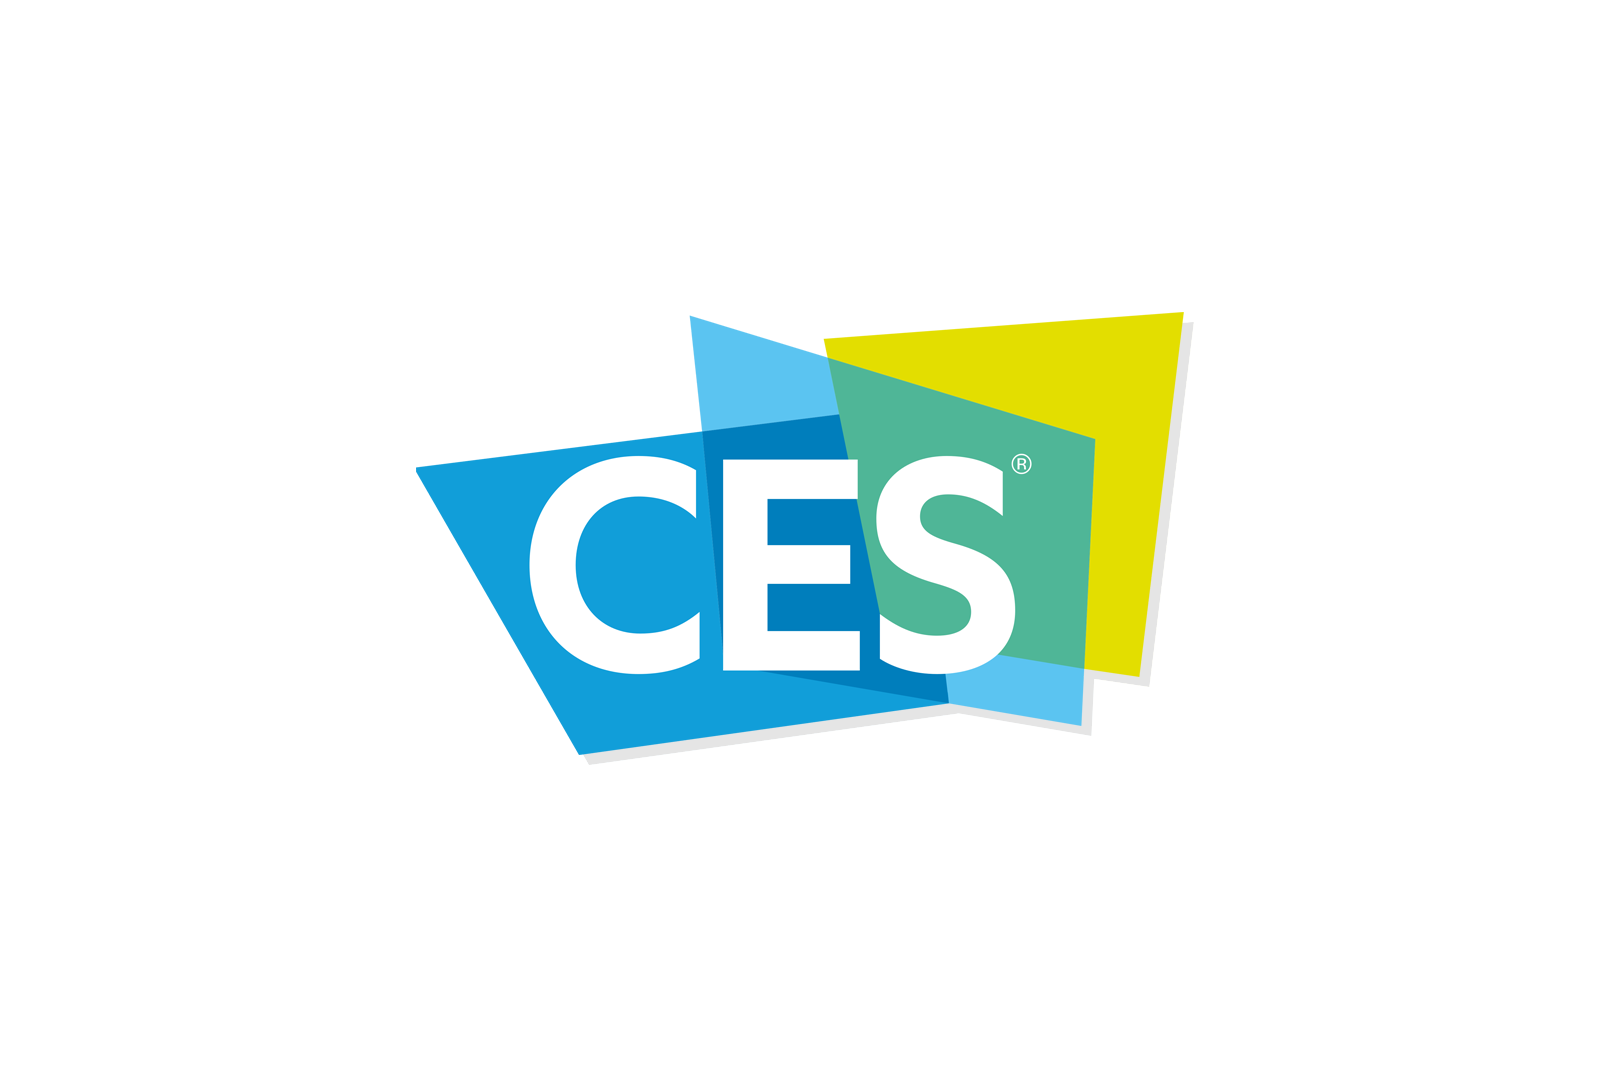 A featured image with the CES logo at the center